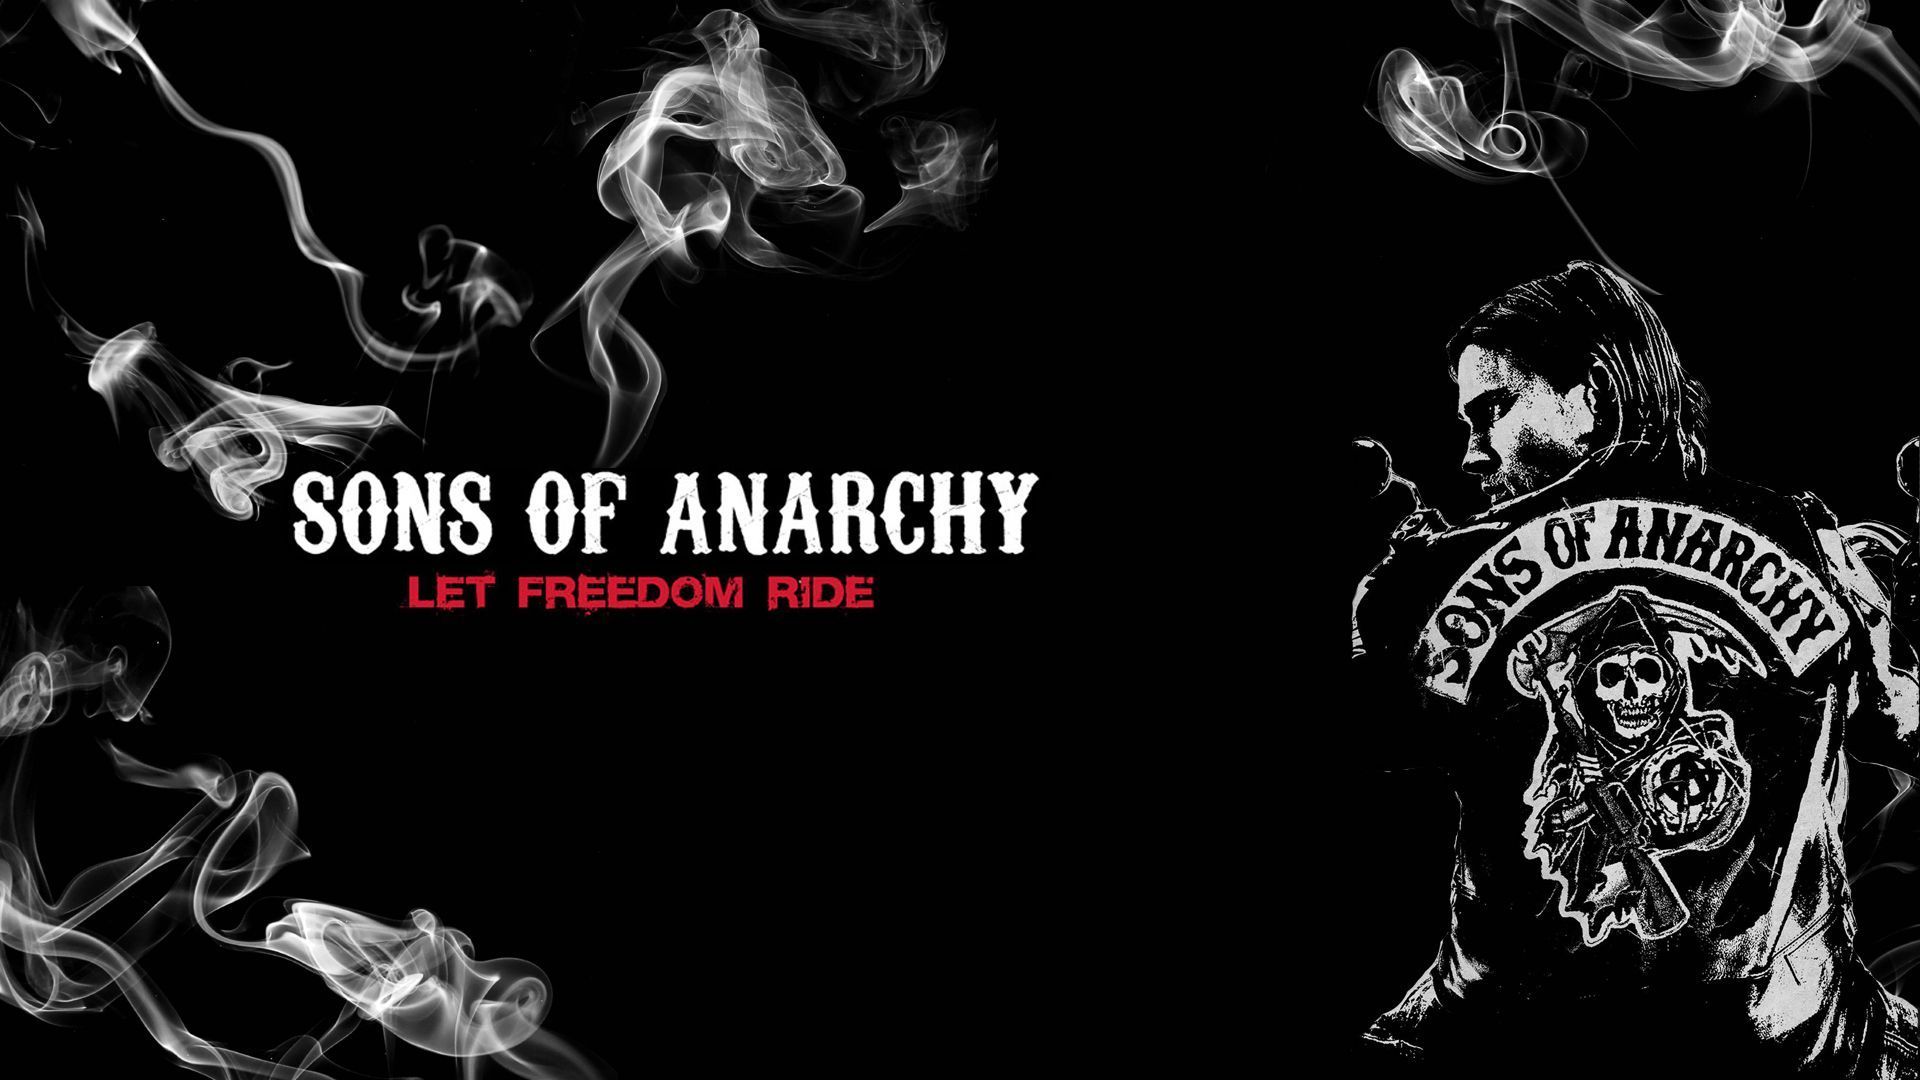 Sons Of Anarchy - Sons Of Anarchy Wallpaper (19815280) - Fanpop